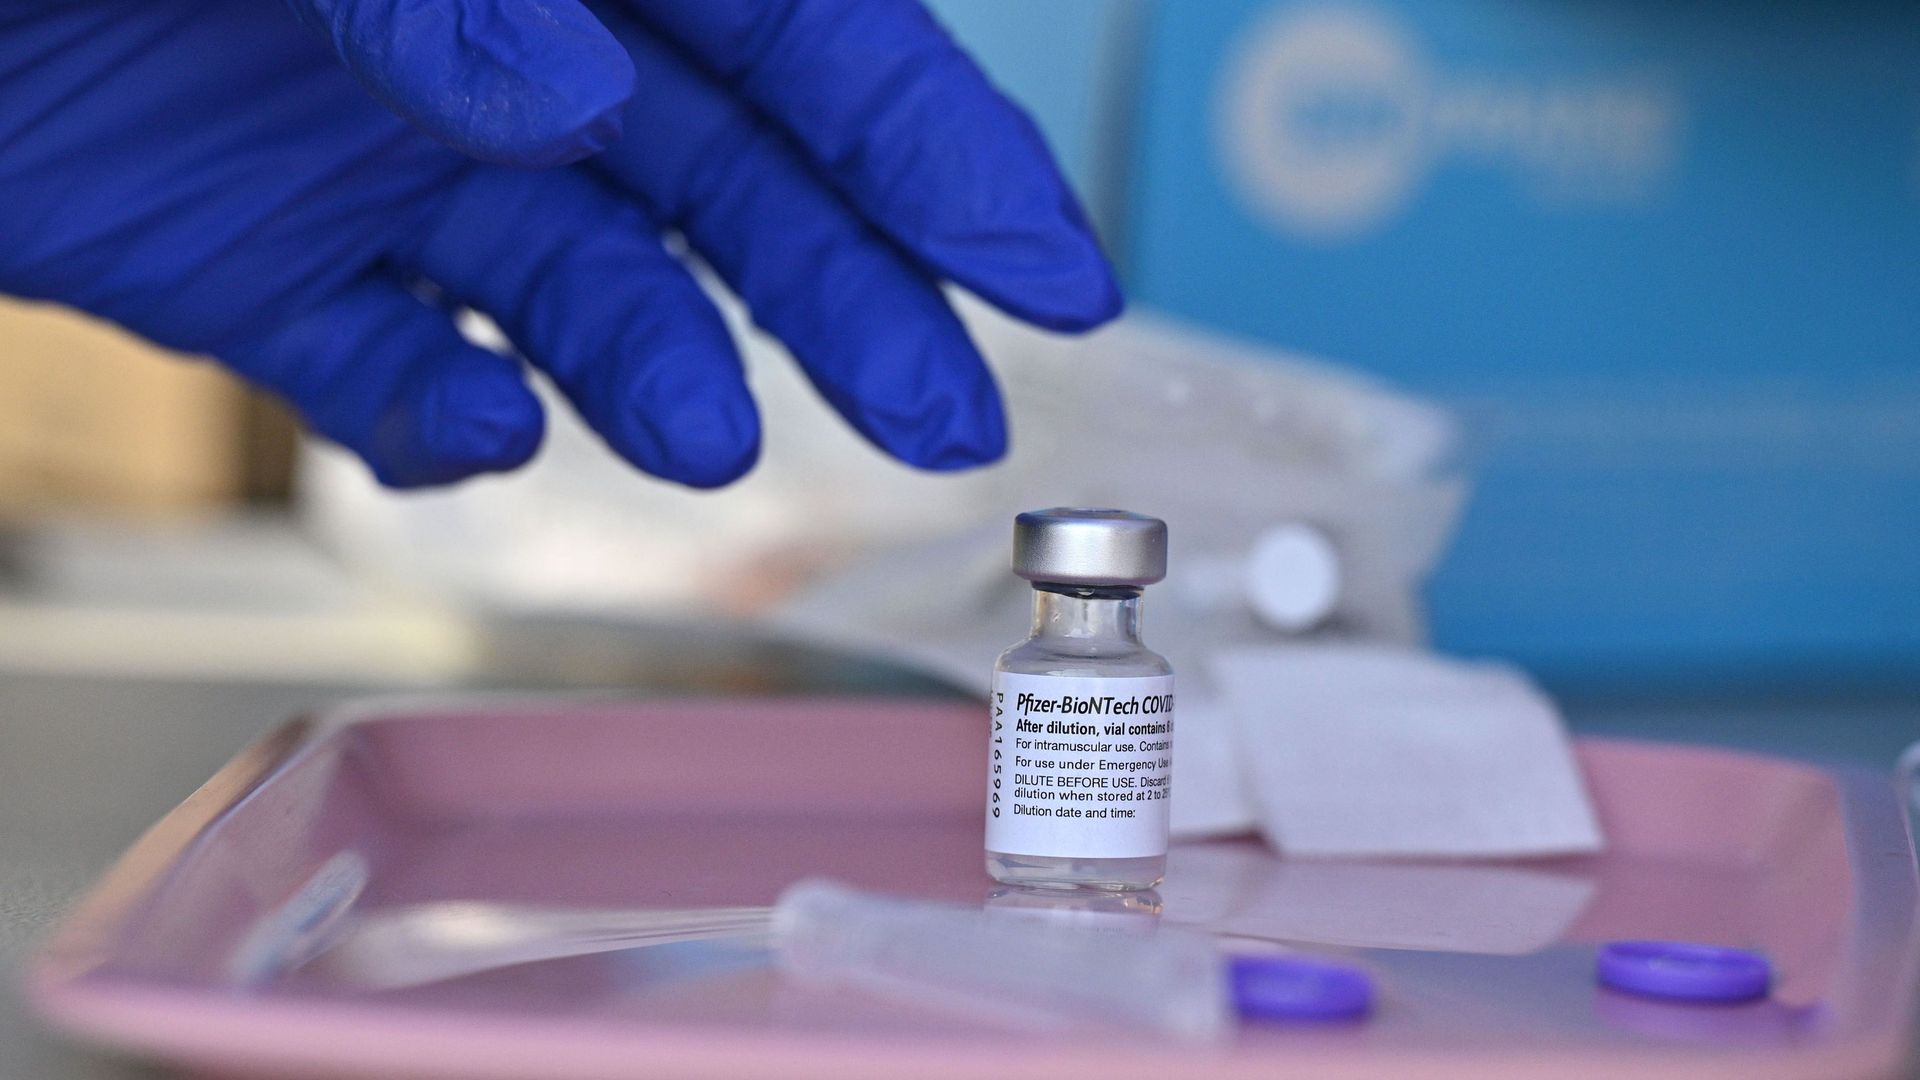 A nurse reaches for a vial of Pfizer-BioNTech Covid-19 vaccine at a pop up vaccine clinic in the Arleta neighborhood of Los Angeles, California, August 23, 2021